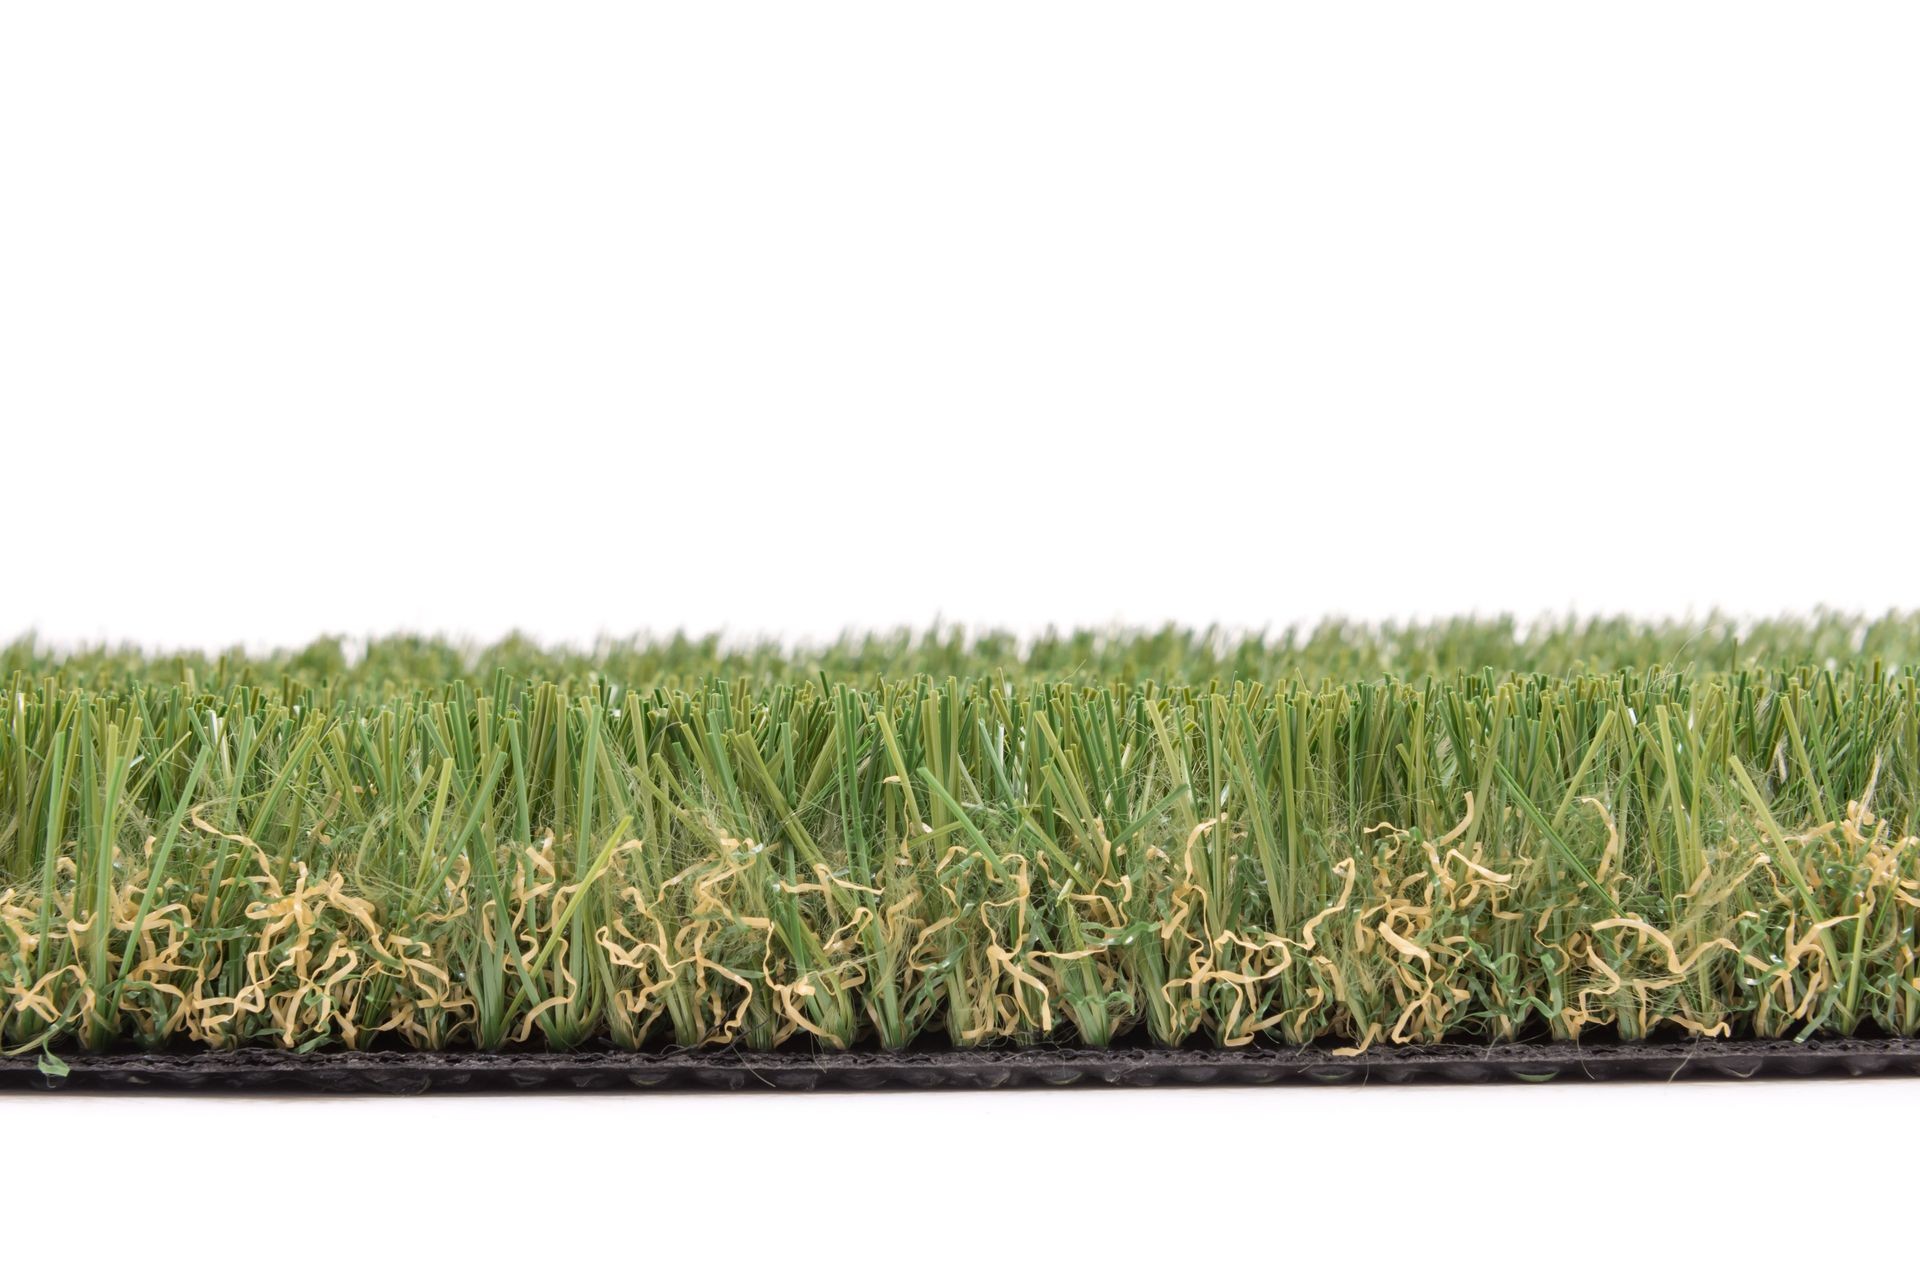 Artificial turf on isolate white background.